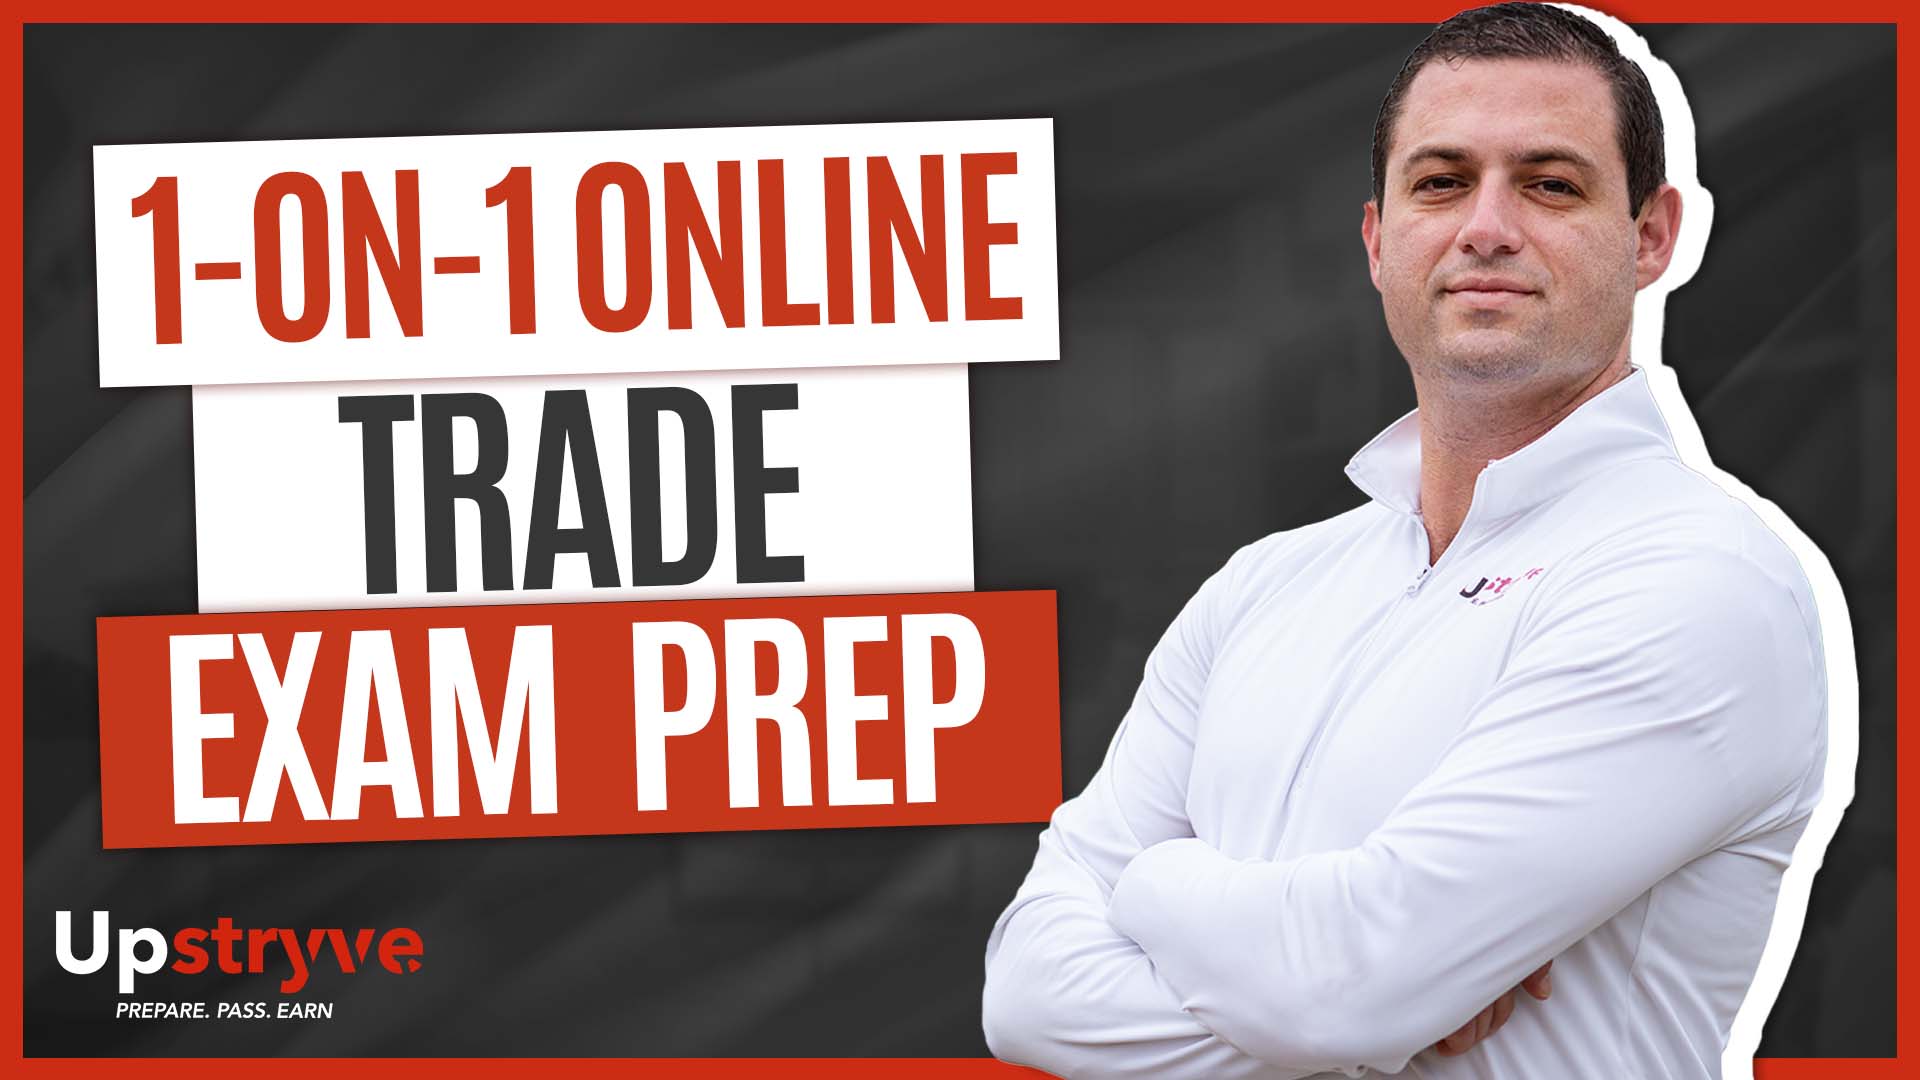 Call us today: 877-938-1888. Online trade exam prep is the future of the trade's industry. In today's interview with Founder and CEO Noah Davis we chat about how Upstryve is growing their catalogue of qualified trade professionals for their tutoring platform, as well as their mentorship programs. Upstryve is the best resource for online trade exam prep. Upstryve provides books, course, tutoring and mentorship all online. Find out how Upstryve can help you accomplish your goals whether you want to earn your license or start a new career from home using the skills you've acquired over the years as a trade professional.